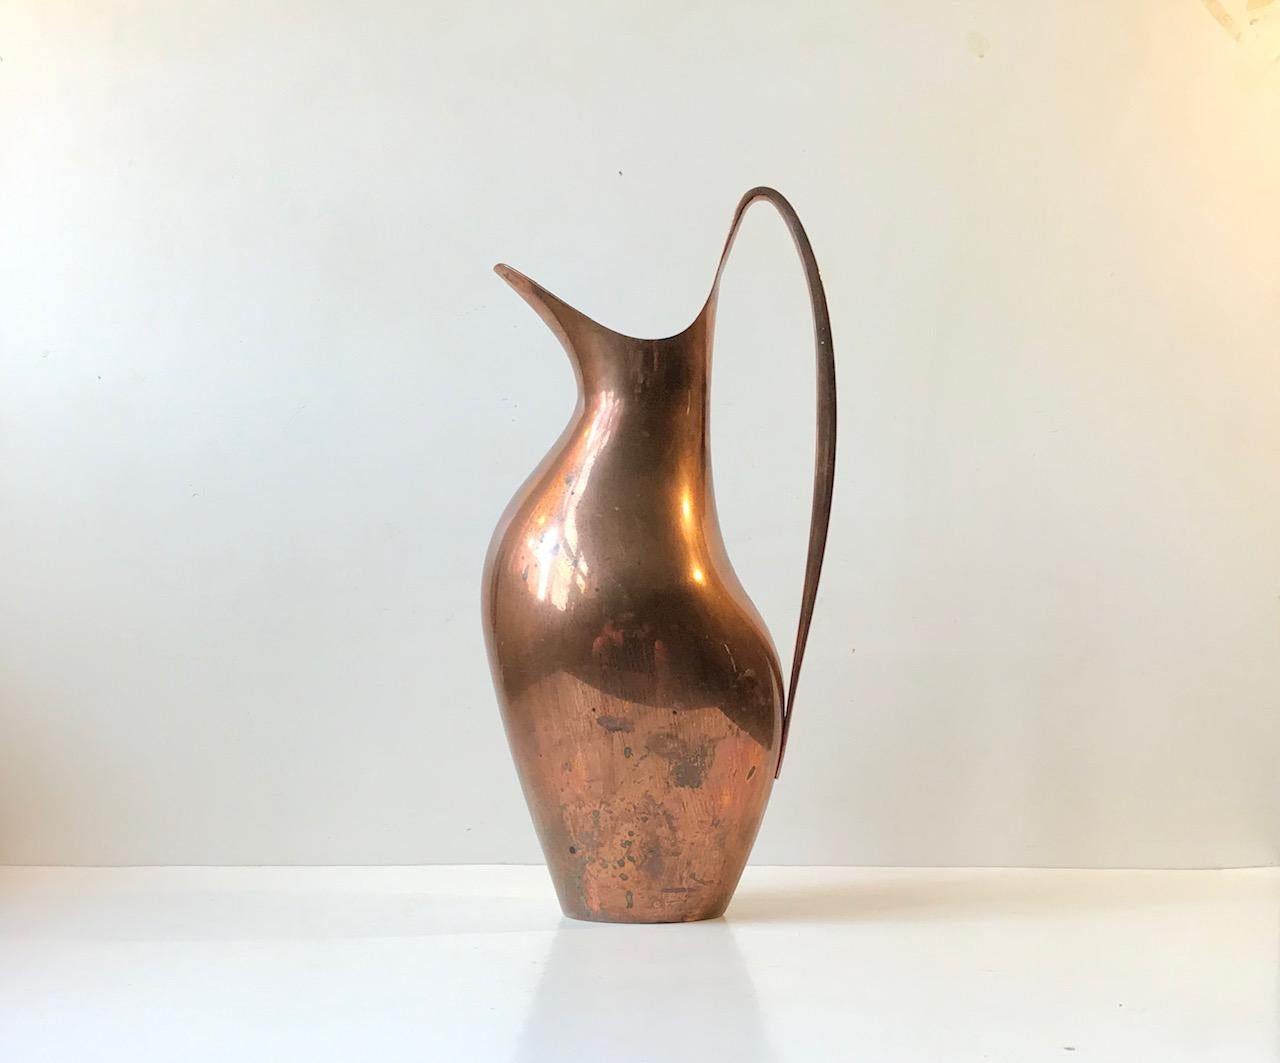 Important HK piece for Georg Jensen in Denmark. It is called Masterpiece and has been nicknamed 'The Pregnant Duck' pitcher. It was designed by the danish silversmith and architect Henning Koppel in 1954. Initially it came in stainless steel and